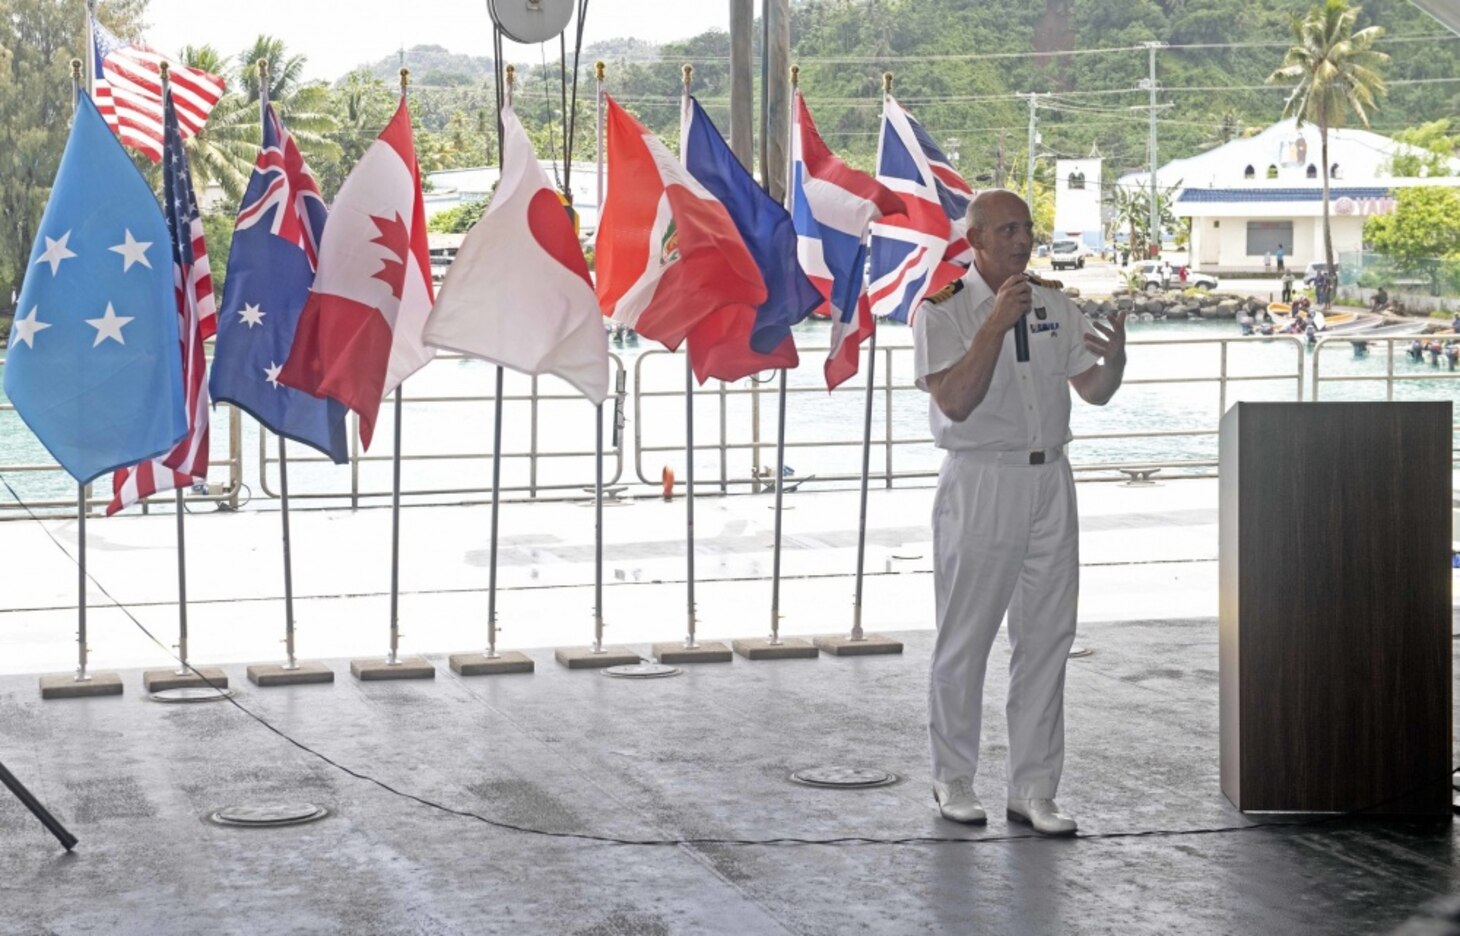 CHUUK, Federated States of Micronesia (April 13, 2019) Royal Navy Capt. Paddy Allen, director of mission, speaks during the opening ceremony aboard the Military Sealift Command expeditionary fast transport ship USNS Brunswick (T-EPF 6) during Pacific Partnership 2019. Pacific Partnership, now in its 14th iteration, is the largest annual multinational humanitarian assistance and disaster relief preparedness mission conducted in the Indo-Pacific. Each year, the mission team works collectively with host and partner nations to enhance regional interoperability and disaster response capabilities, increase stability and security in the region, and foster new and enduring friendships in the Indo-Pacific.